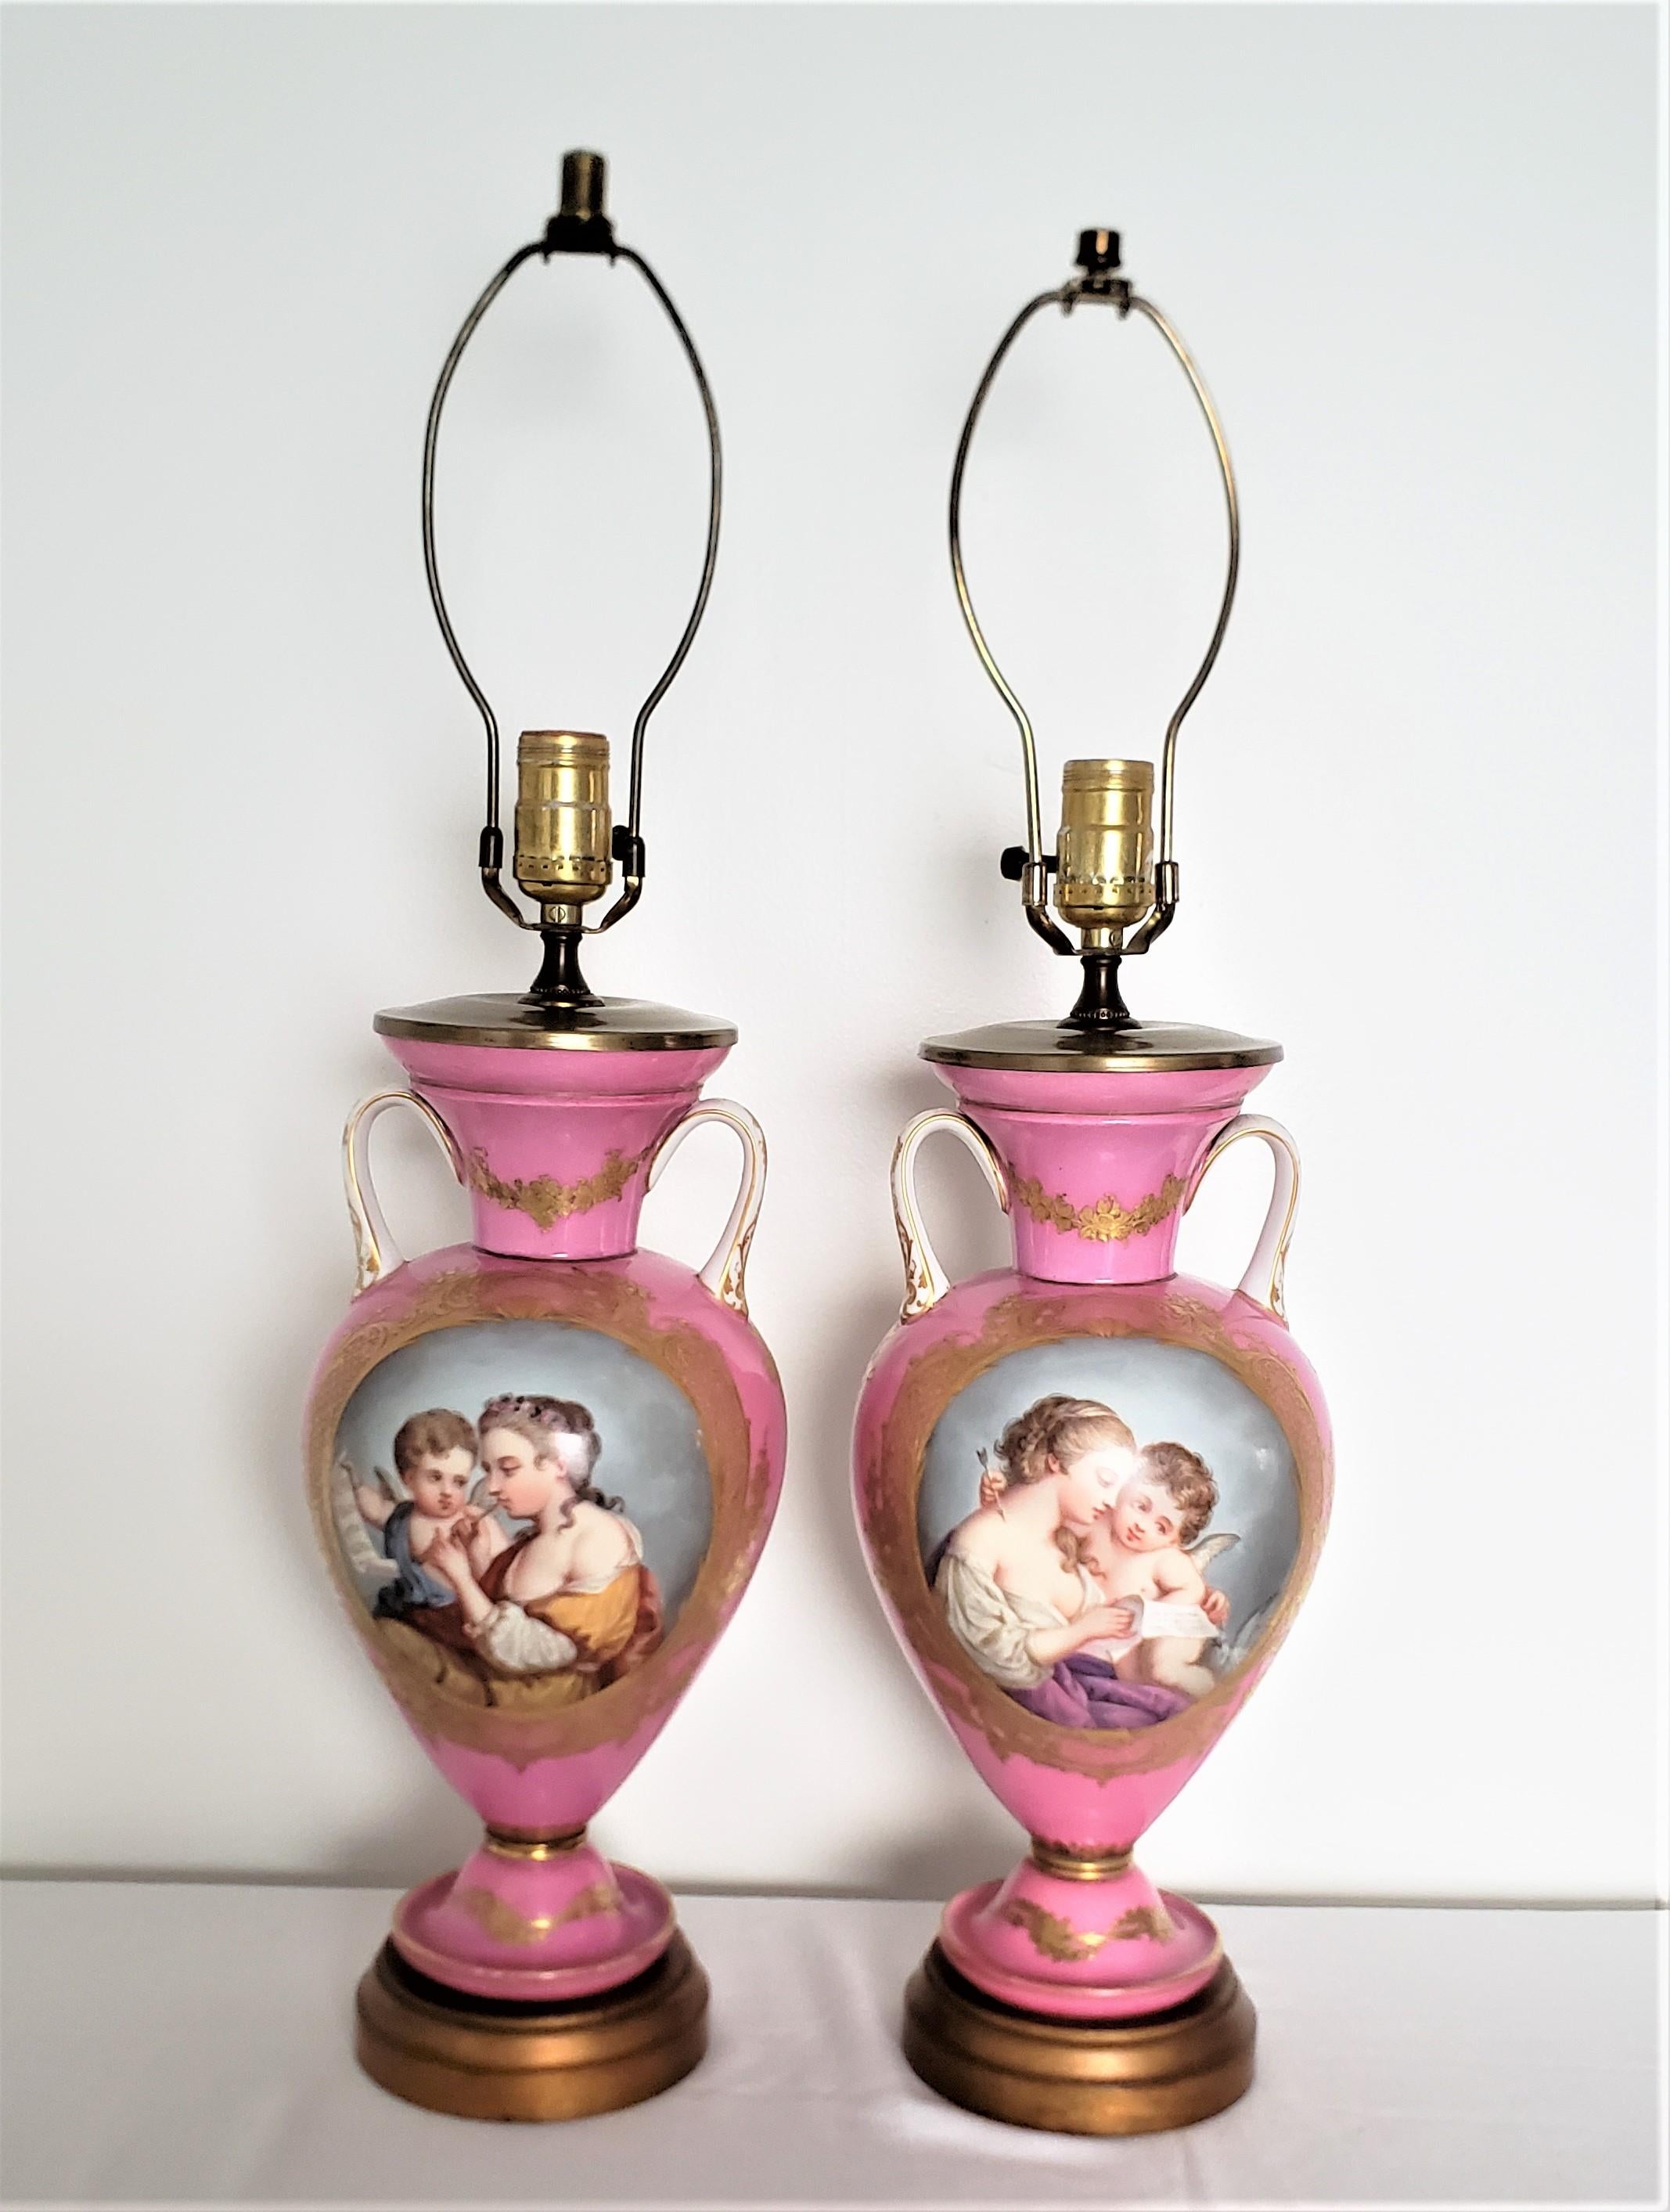 This pair of hand-painted porcelain table lamps are unsigned, but presumed to have originated from France and dating to approximately 1880 and done in a Sevres style. The table lamps have a vivid pink ground with hand painted panels of a young woman